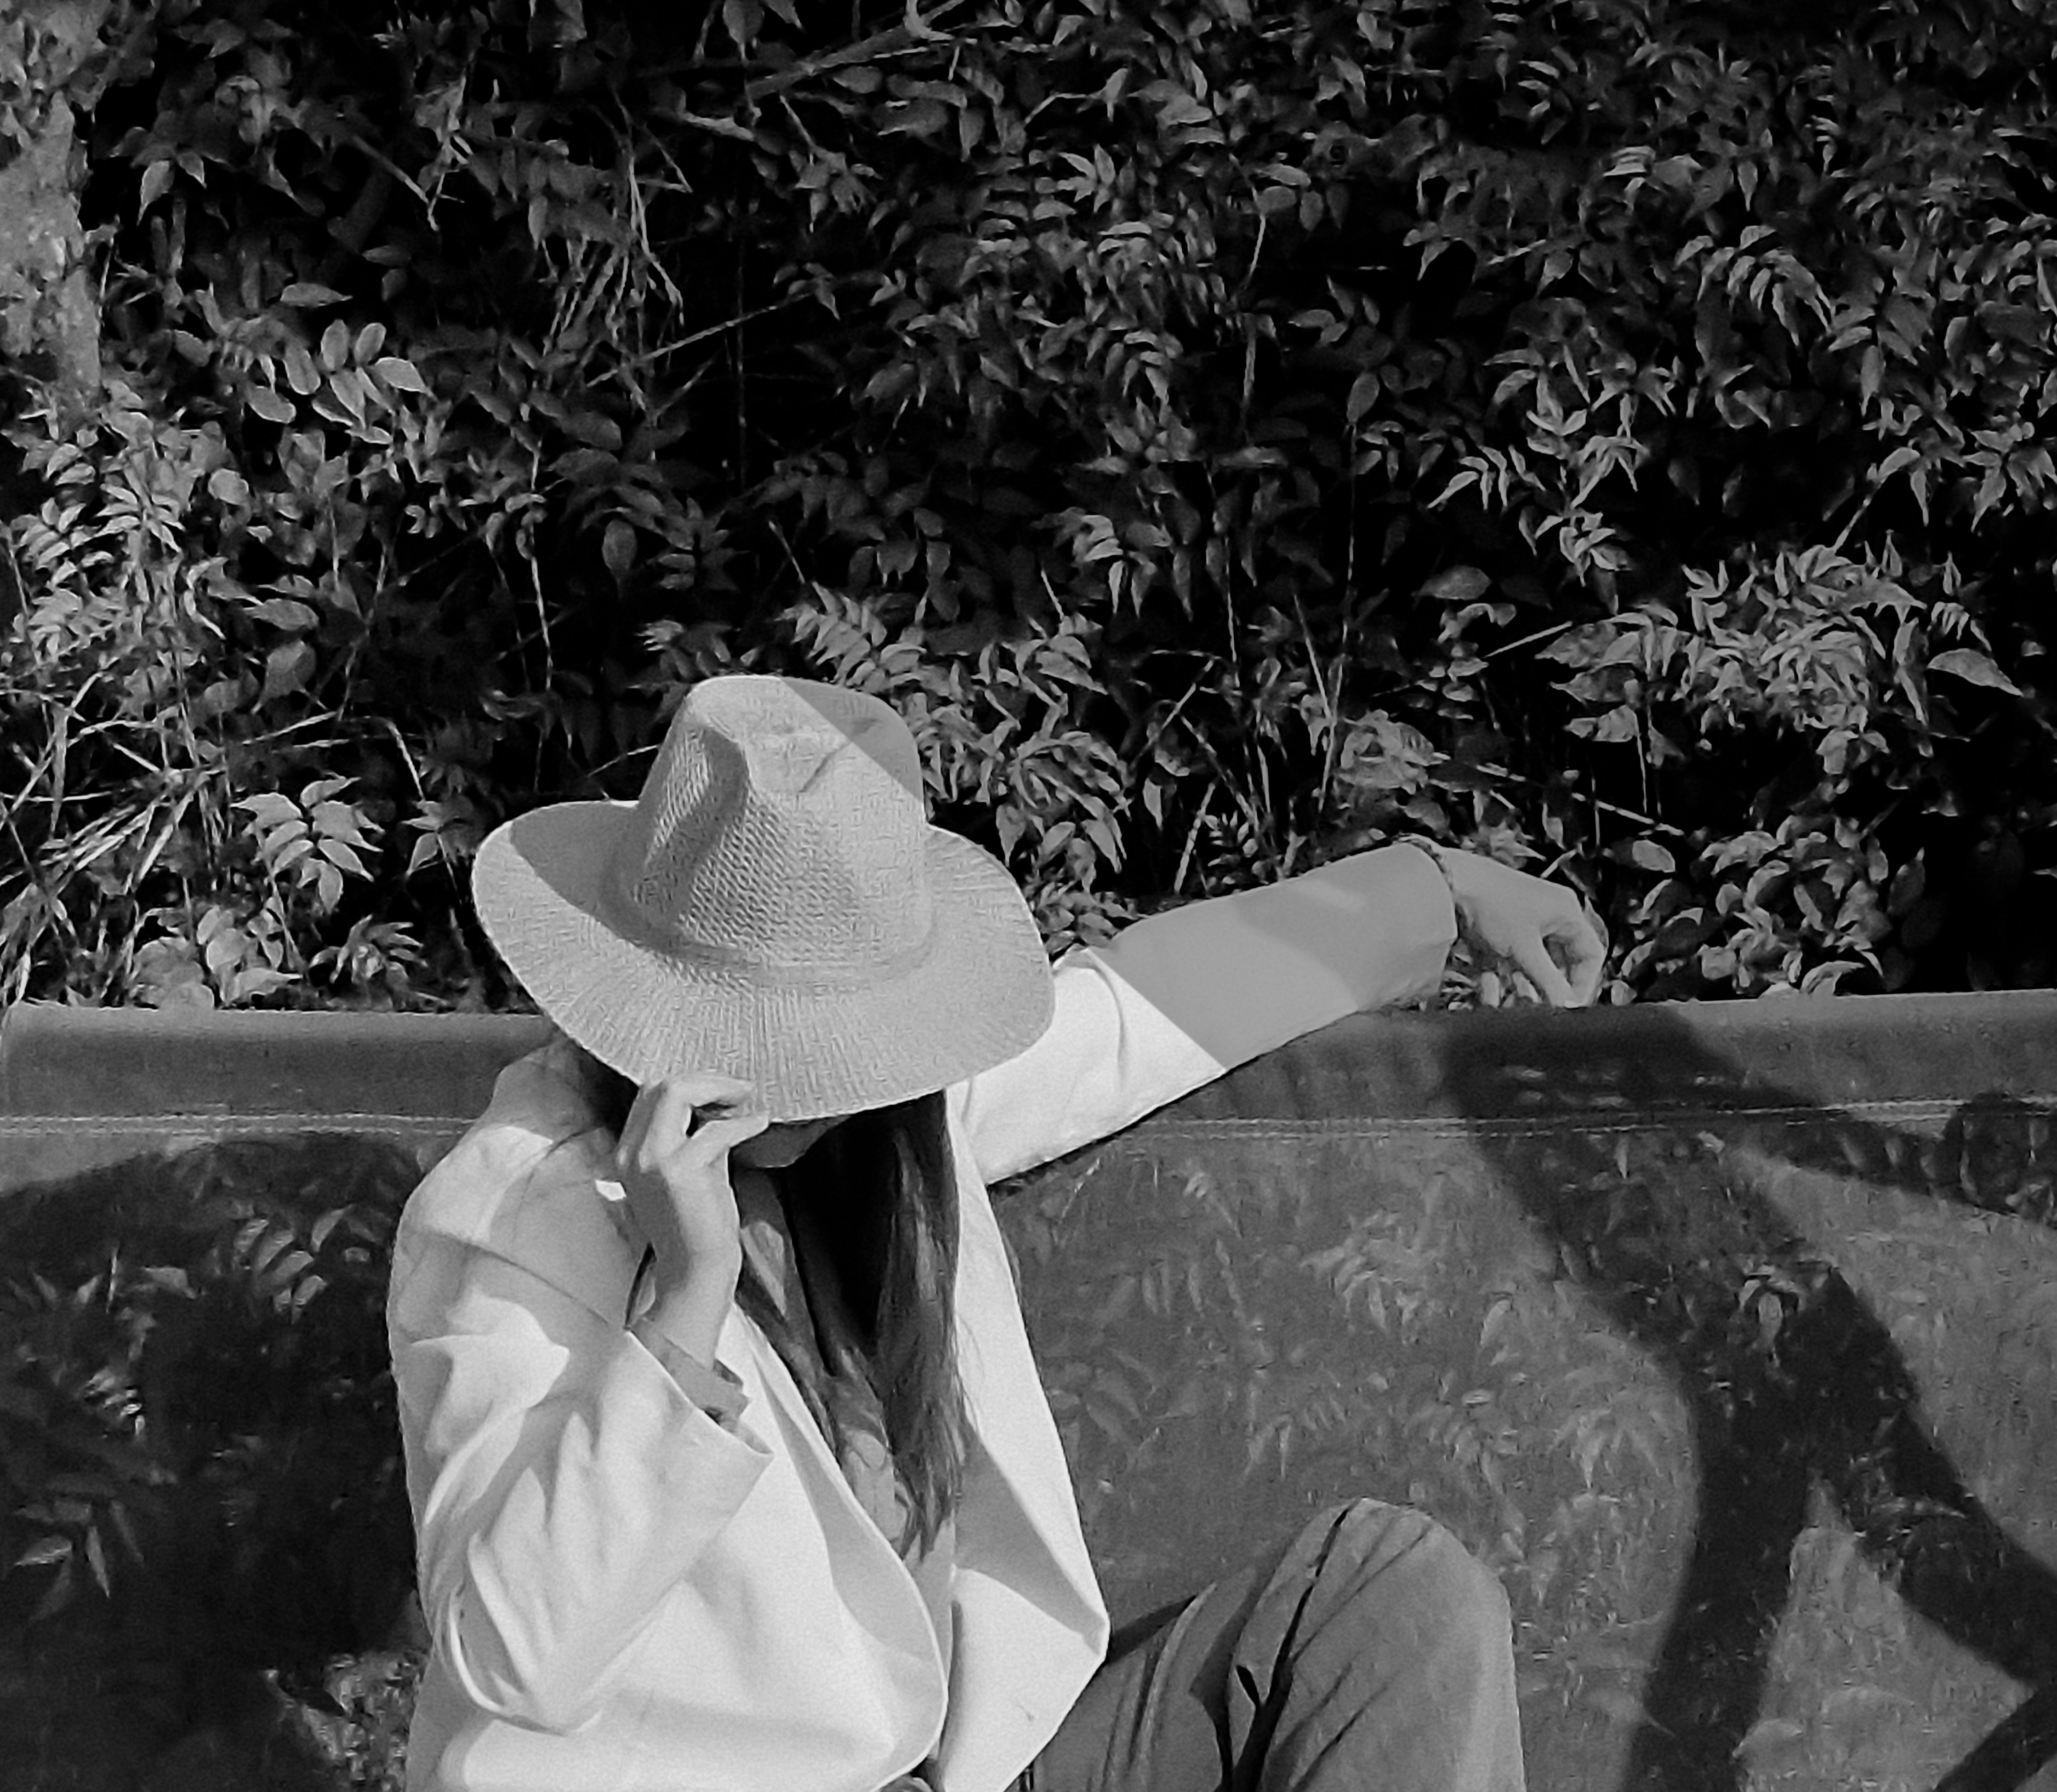 A woman with a hat covering her eyes. | Source: Pexels